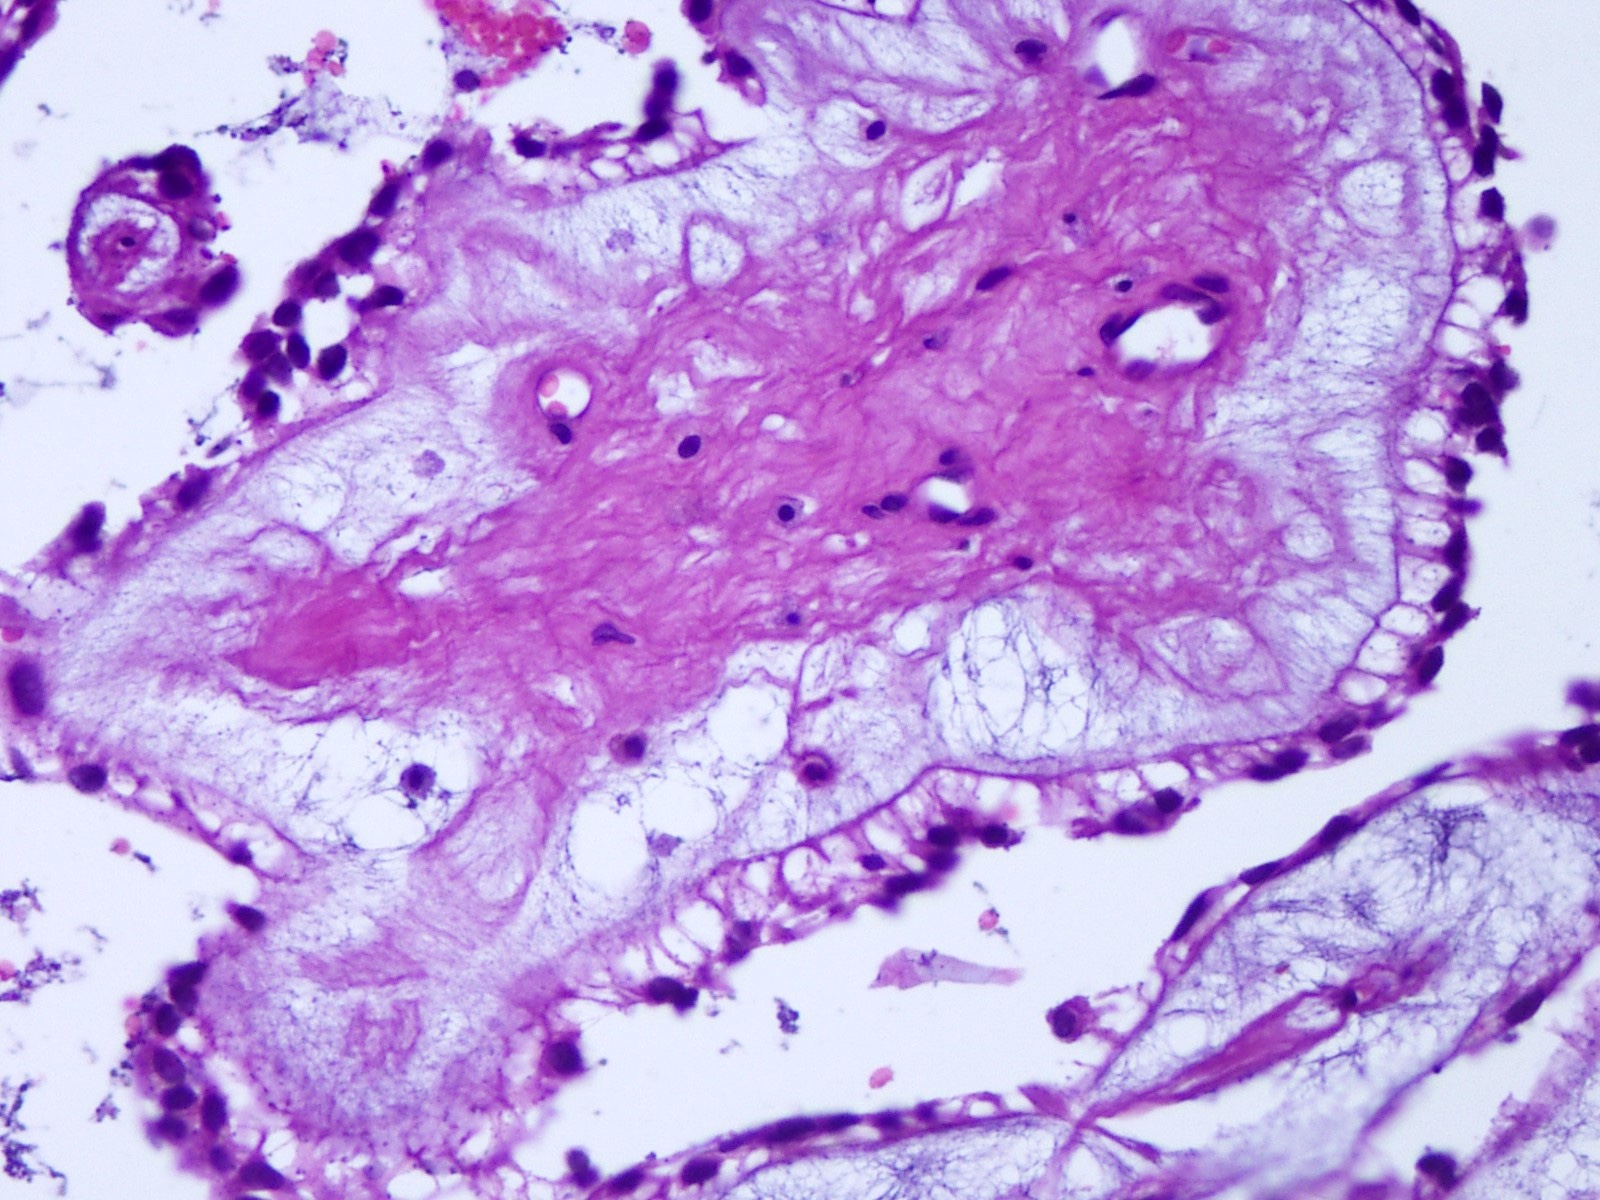 Hyalinized fibrovascular core with myxoid matrix